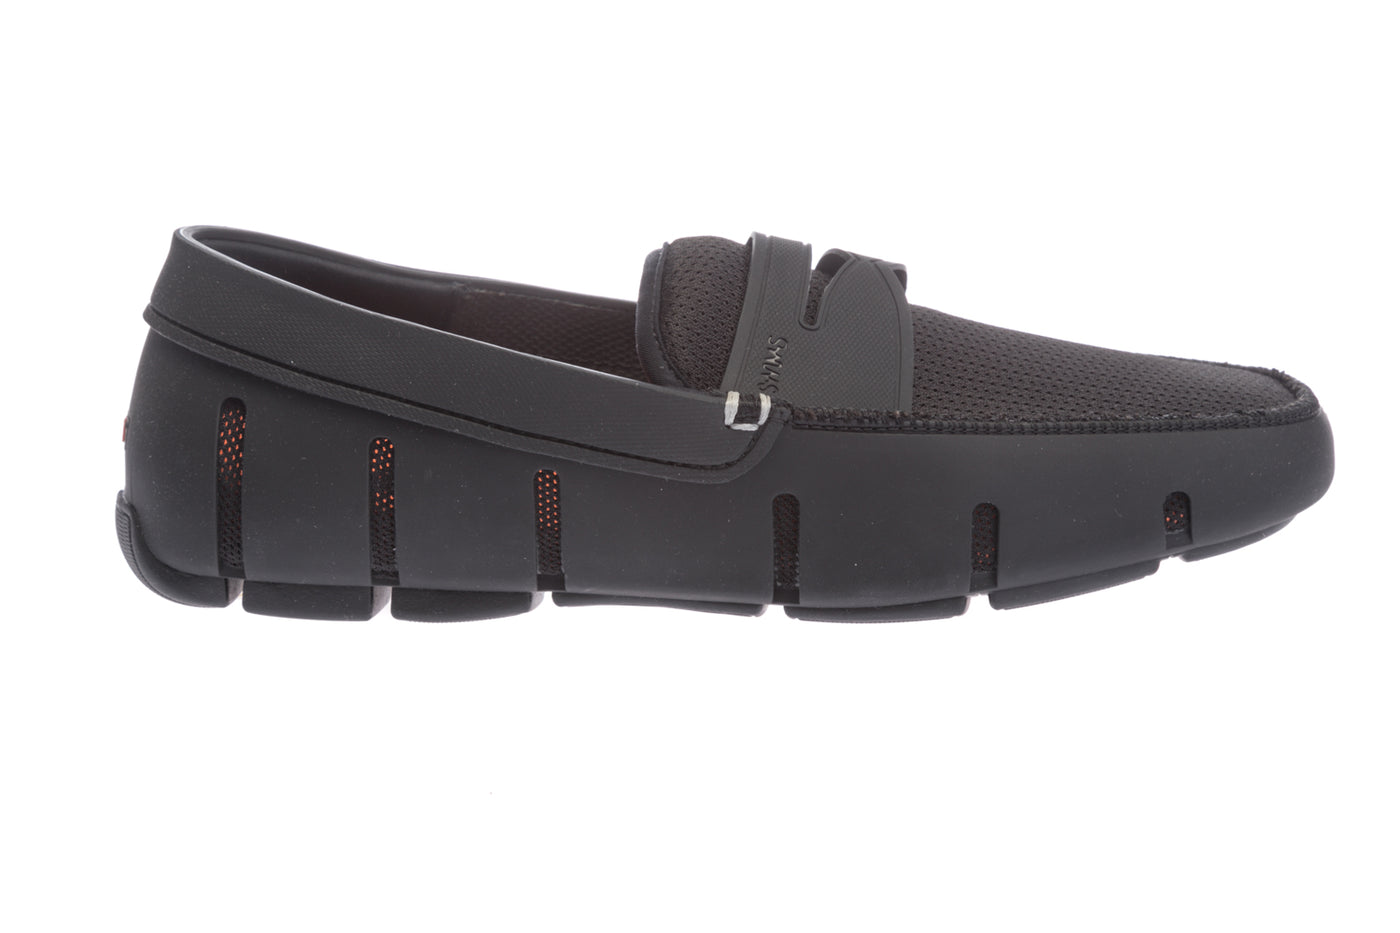 Swims Penny Loafer Shoe in Black